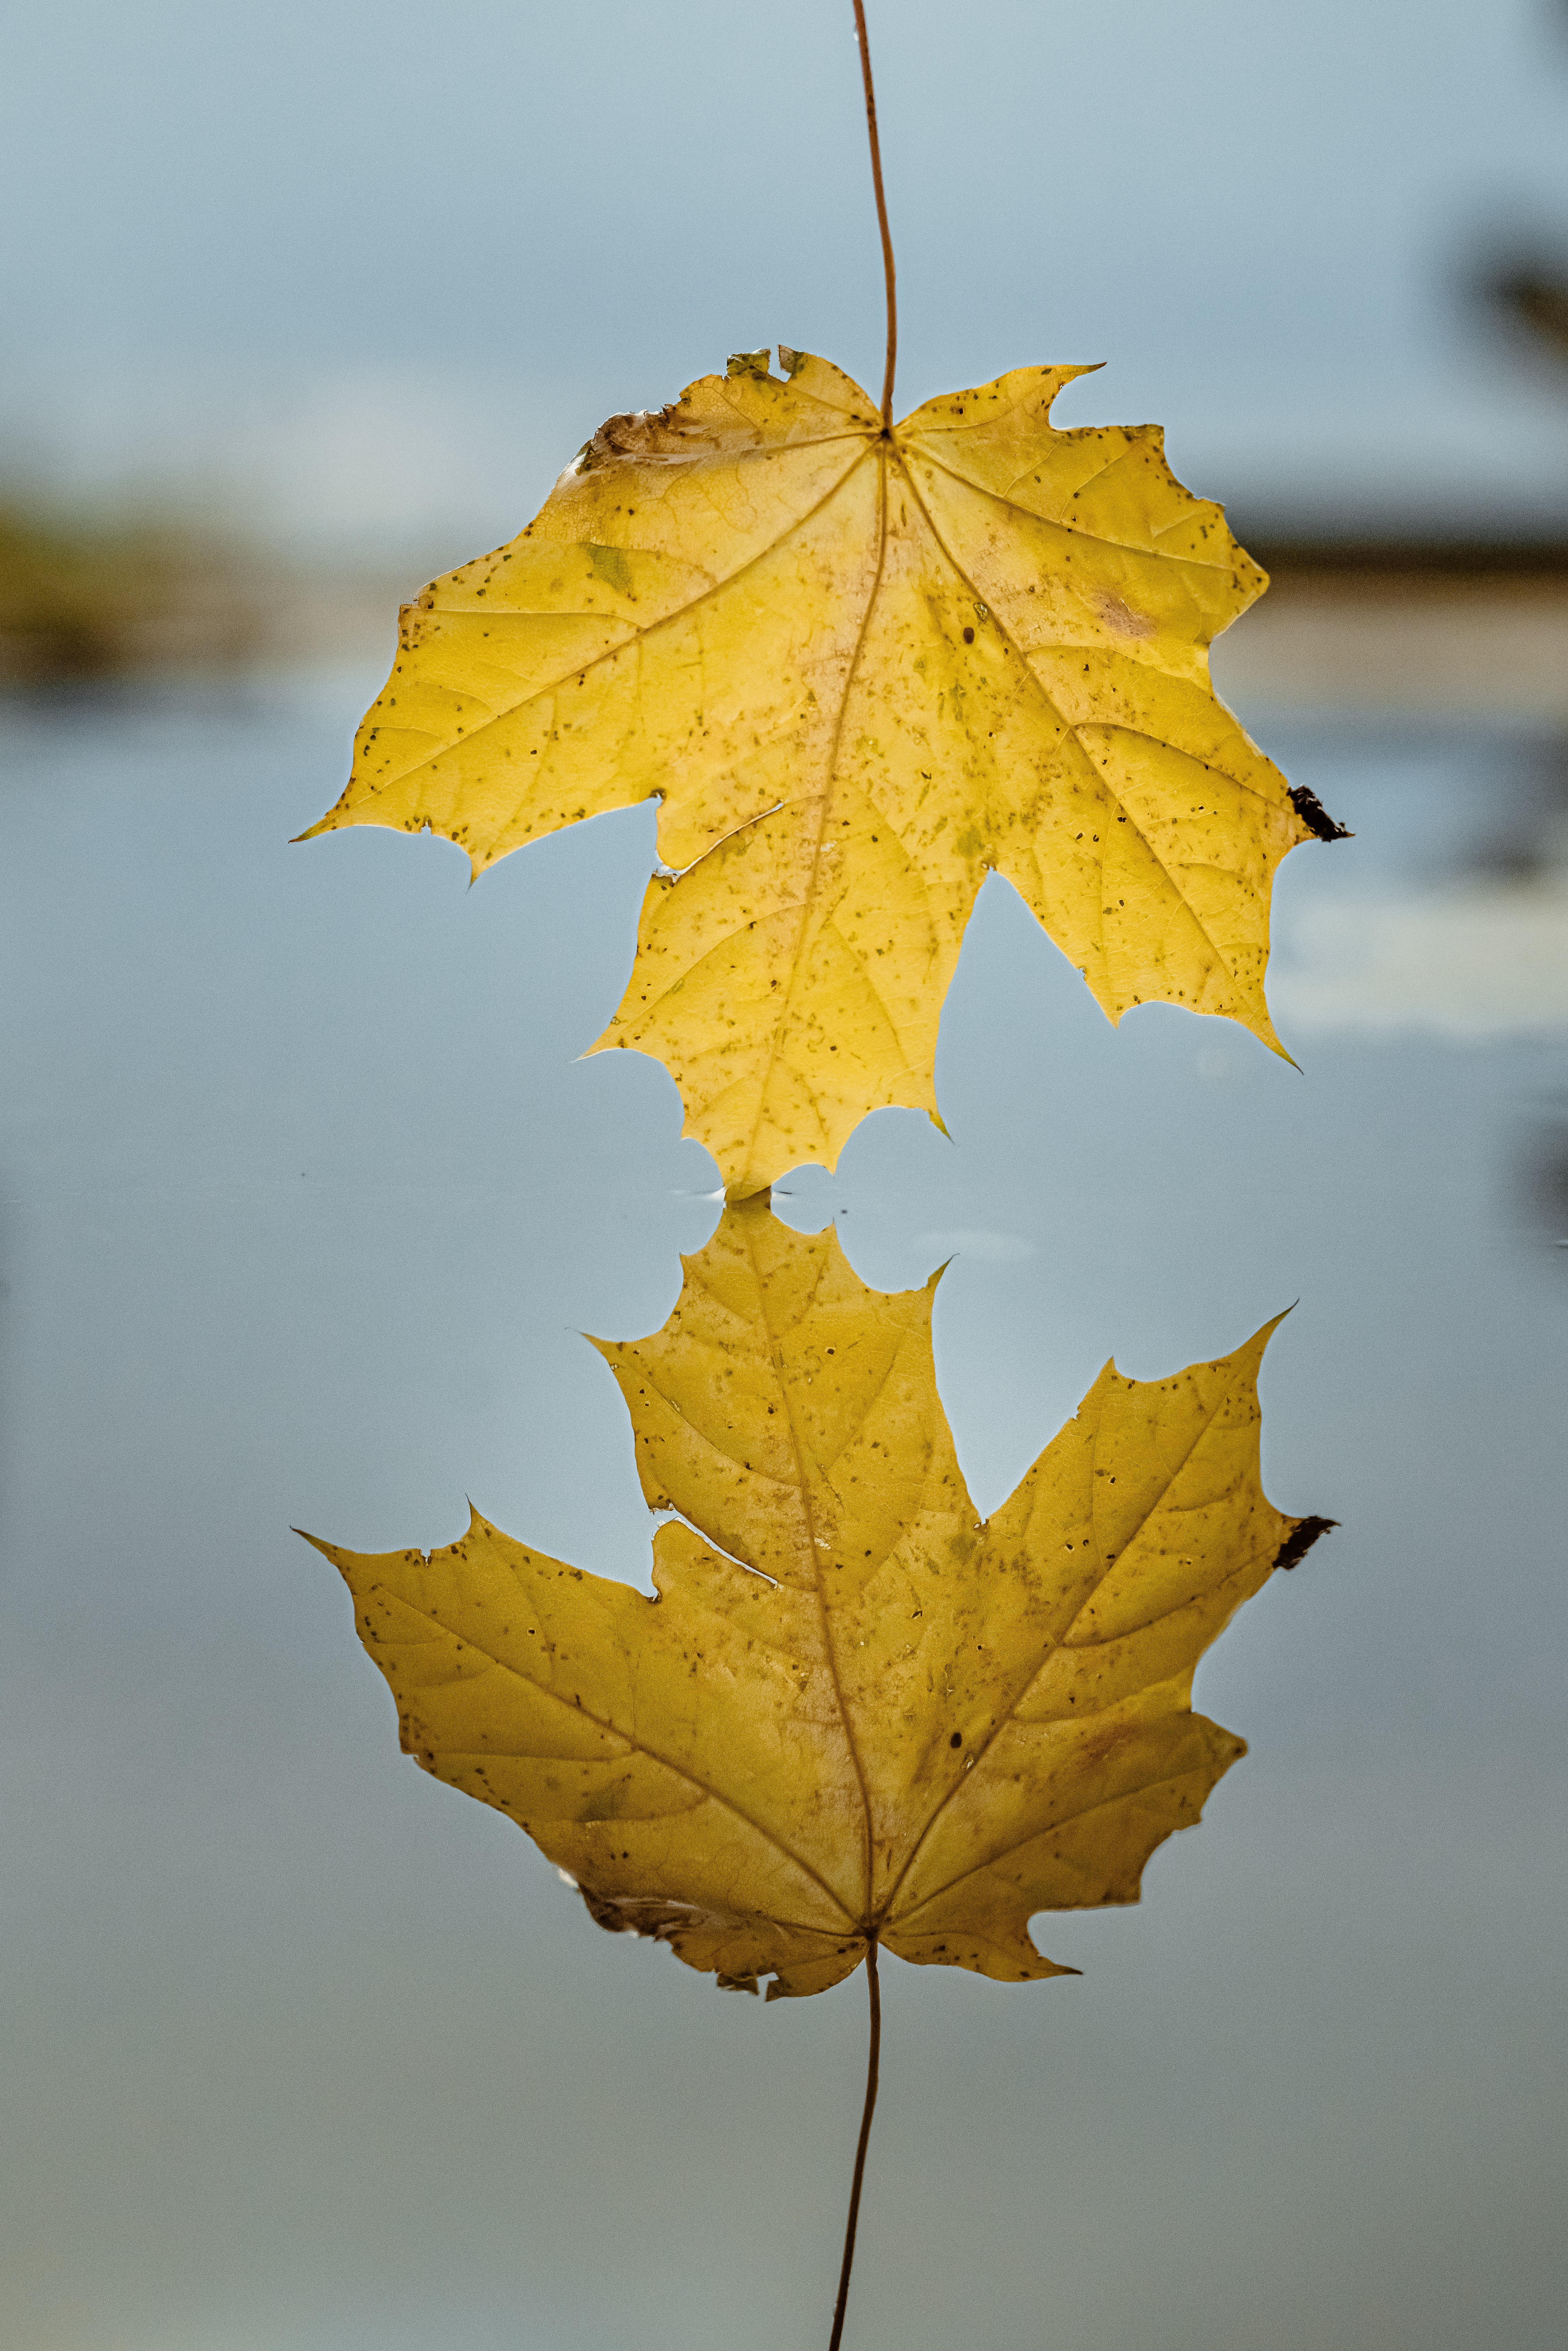 Dying leaf and its reflection